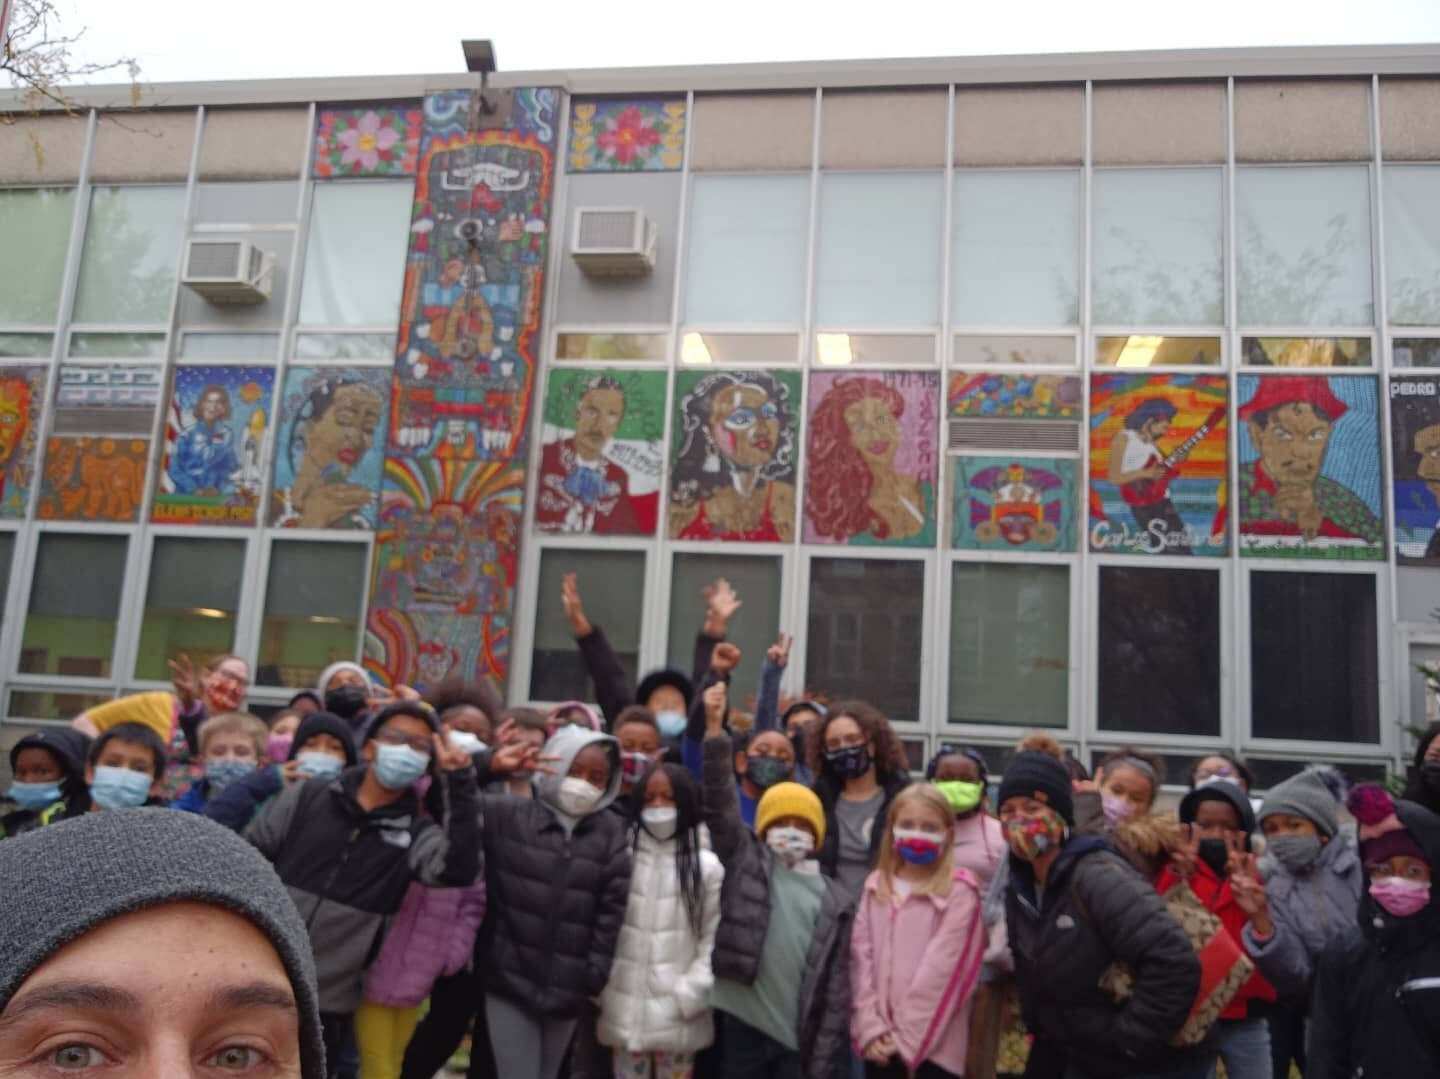 I had a great time giving a tour to these young 4th graders. We visited these mosaics on Cooper School. The maestro Francisco Mendoza lead this project. If you would like to learn more about other murals on 18th street by the late Francisco Mendoza p